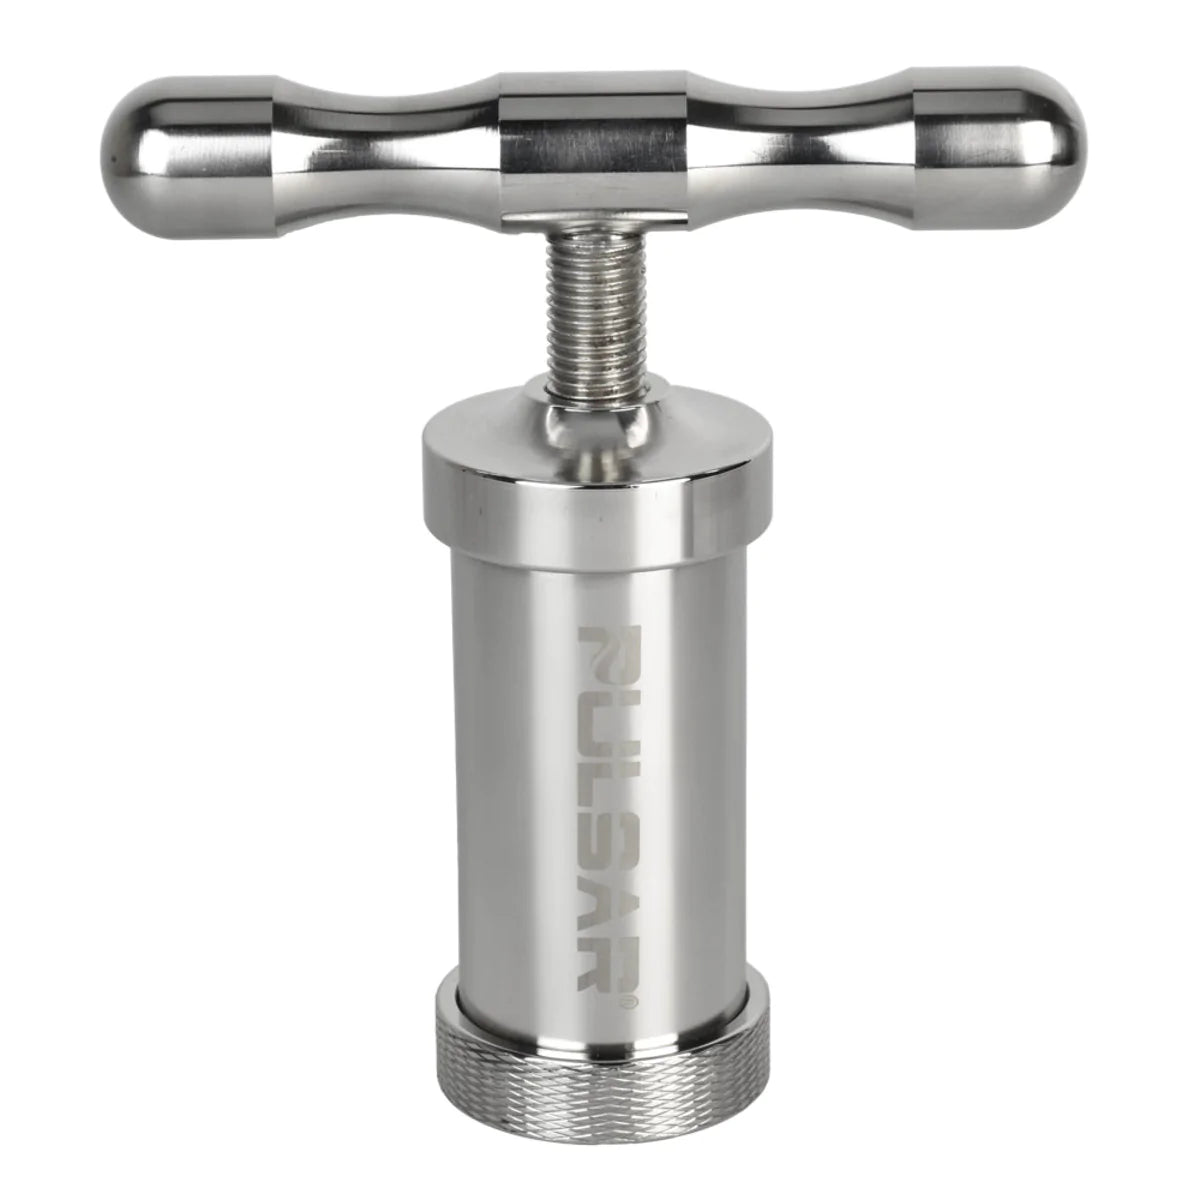 Pulsar Stainless Steel Pollen T-Press, Large Variant, for Dry Herbs, Front View